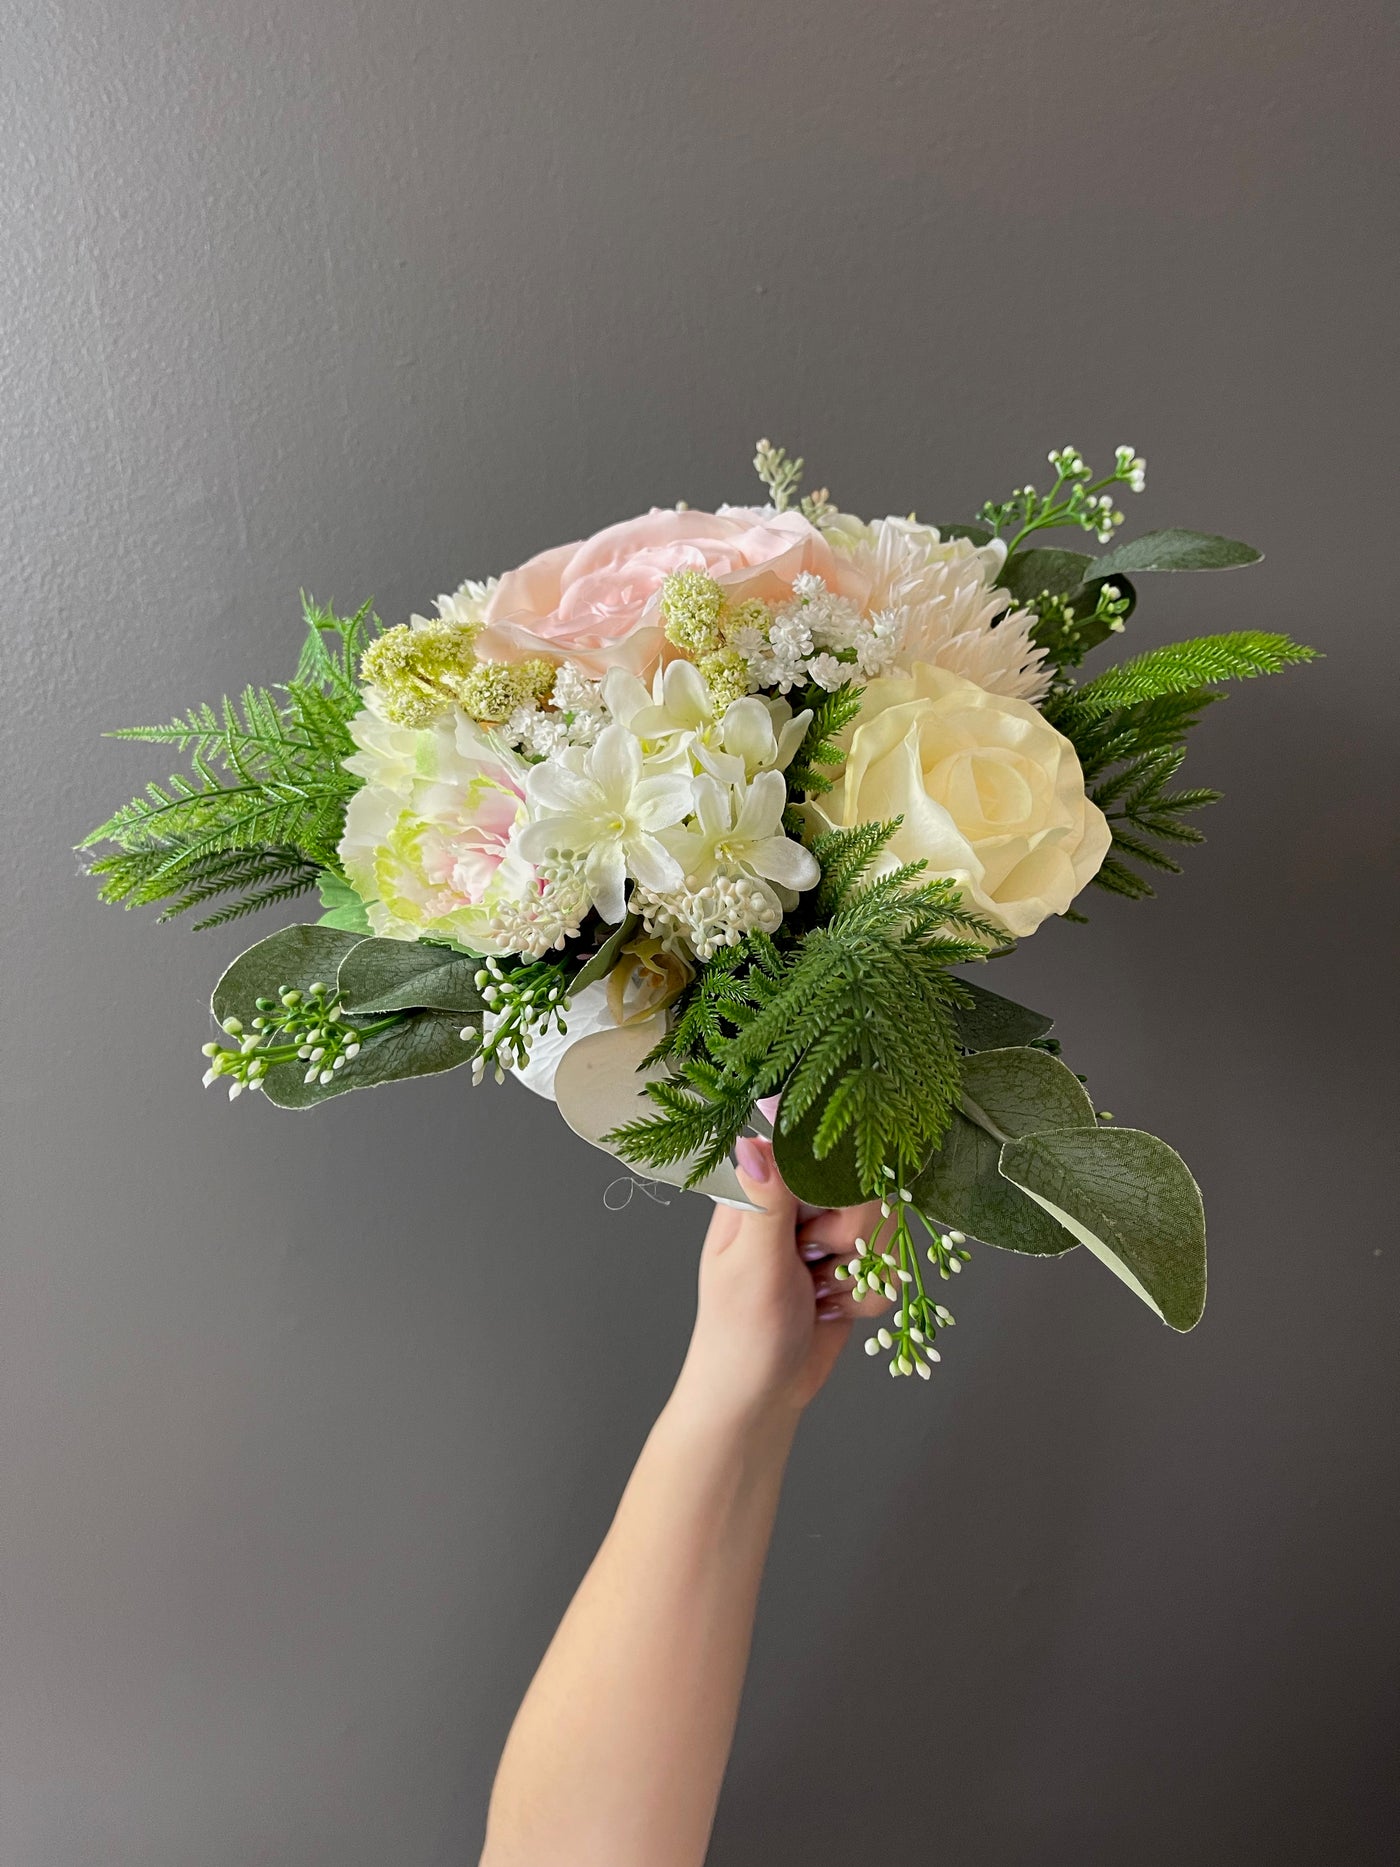 This soft pastel collection is the perfect whisper of elegance featuring pale pink roses, blush dahlias, delicate white peonies, pale pink cabbage roses, white sweet peas, hydrangeas, baby’s breath, and accented with miniature viburnum. These elegant blossoms are surrounded by seeded eucalyptus.  These smaller "flower girl" bouquets are 12" (varying slightly in size depending on the protruding foliage)